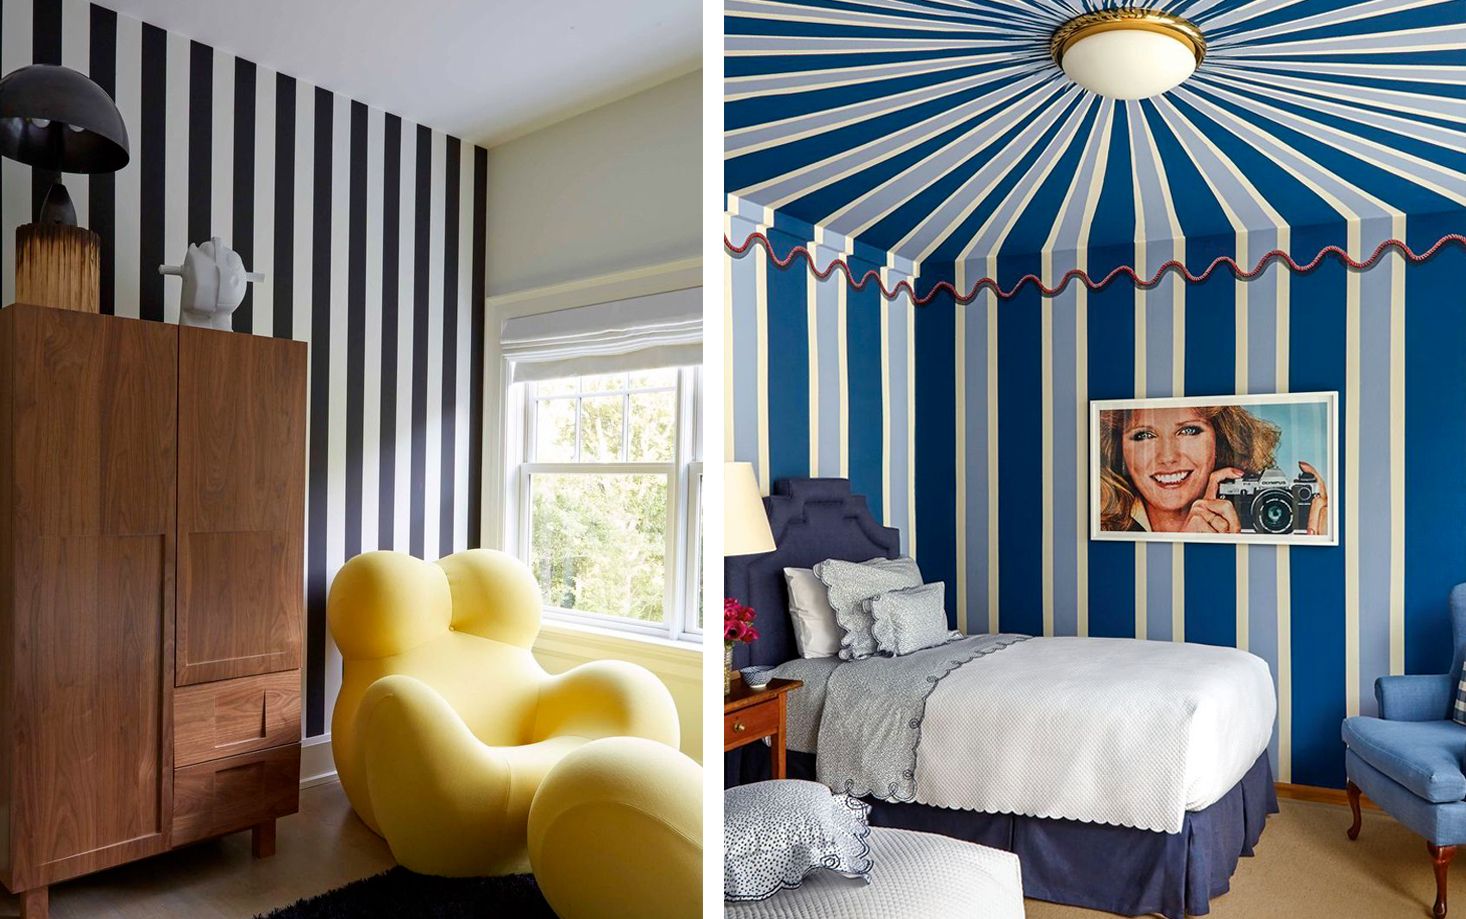 20+ Chic Striped Walls - Photos Of Rooms With Striped Walls